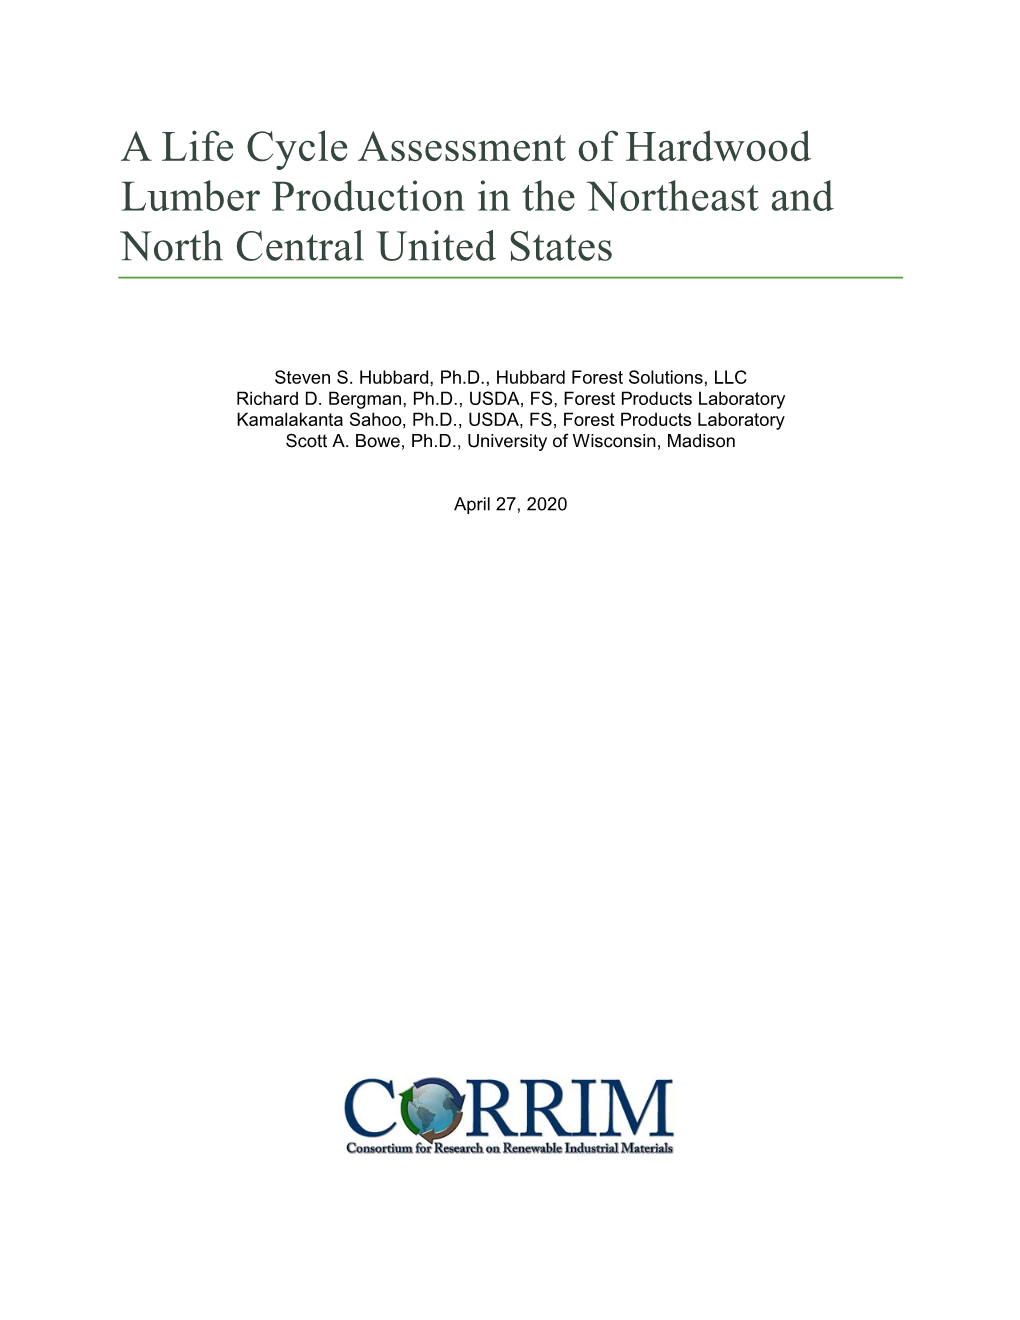 A Life Cycle Assessment of Hardwood Lumber Production in the Northeast and North Central United States